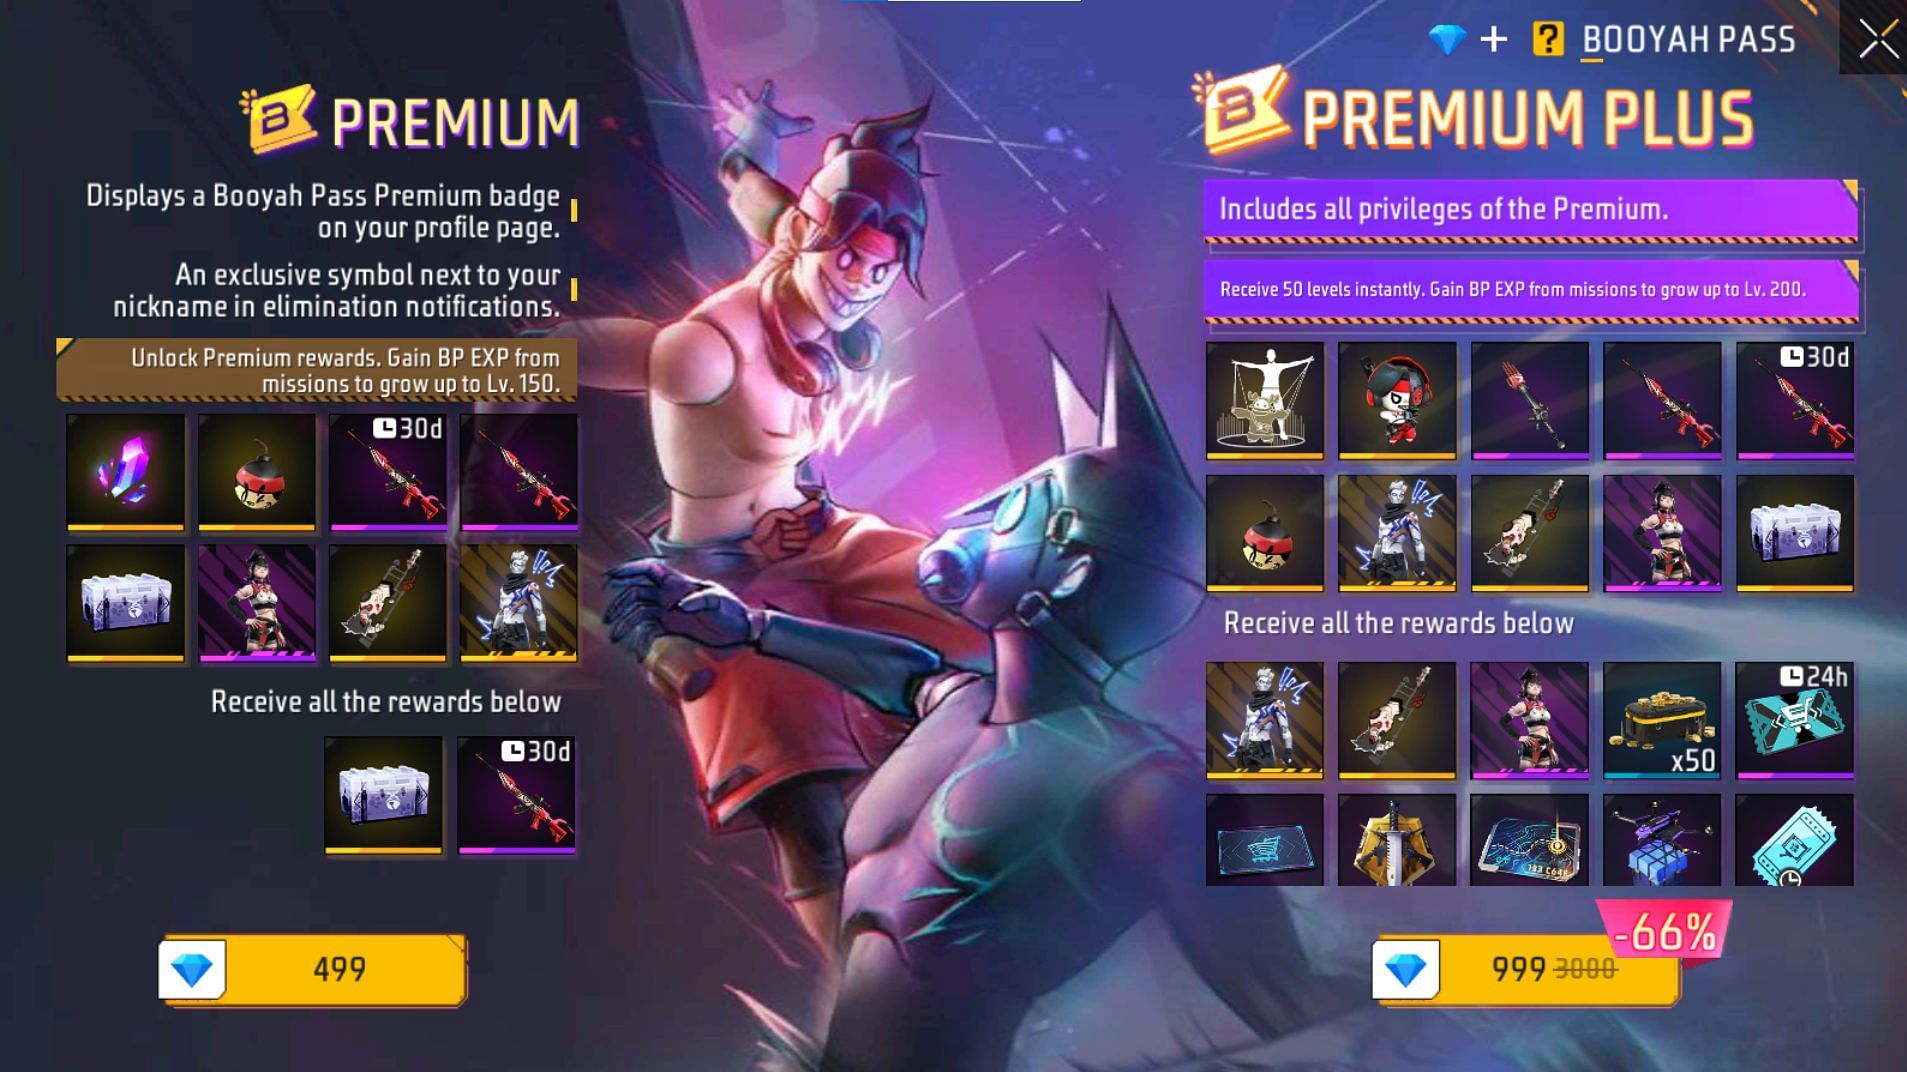 Here is the price of the pass (Image via Garena)